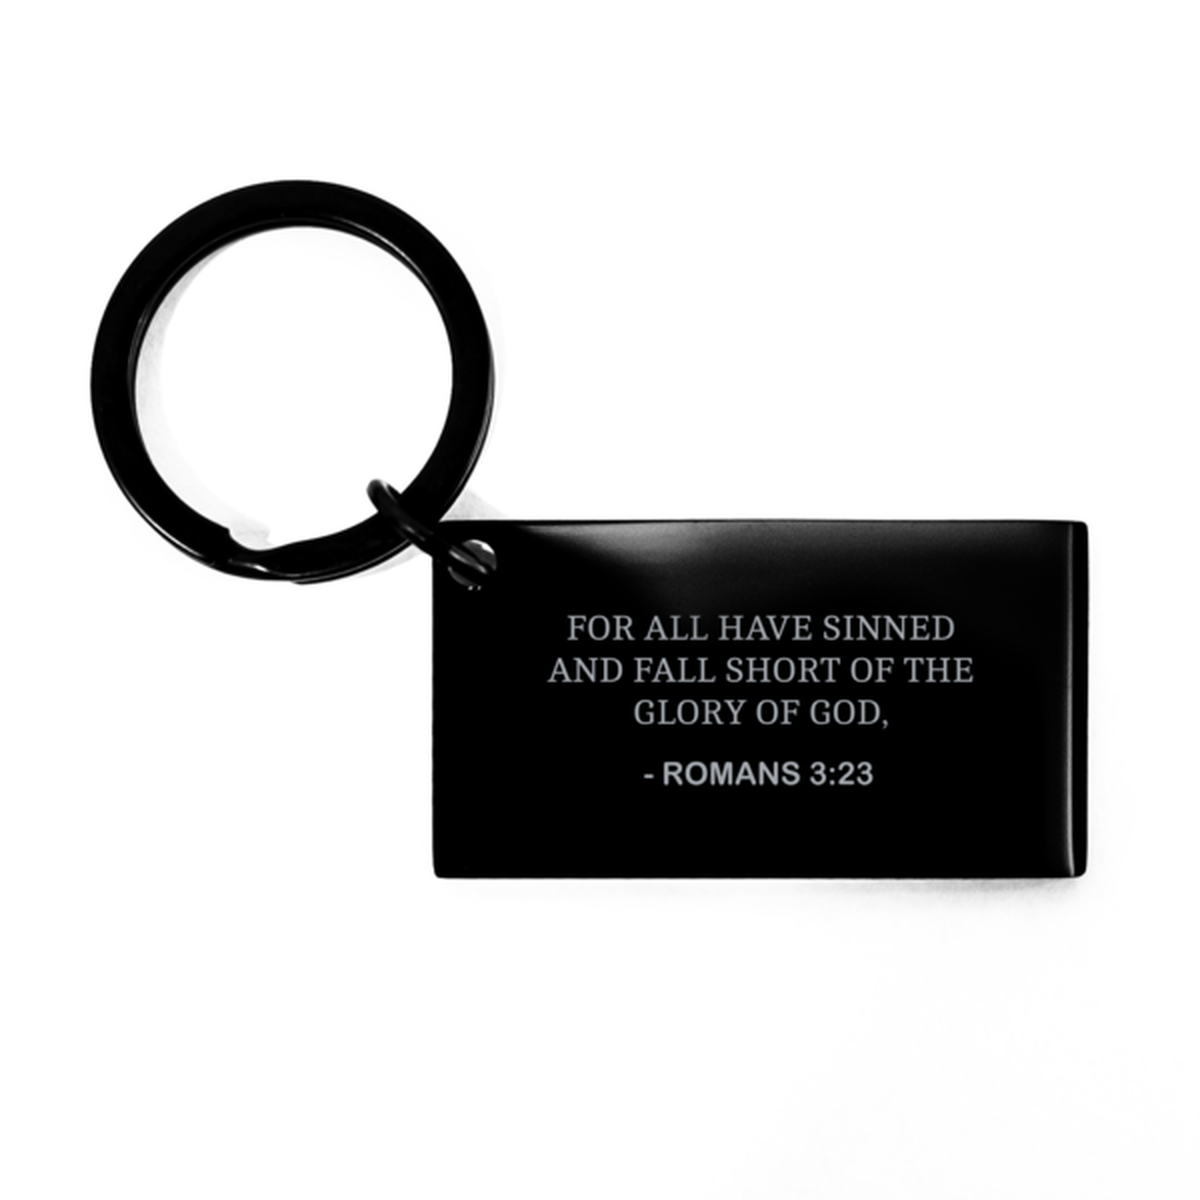 Bible Verse Black Keychain, Romans 3:23 For All Have Sinned And Fall Short Of The Glory, Christian Inspirational Key Ring Gifts For Men Women